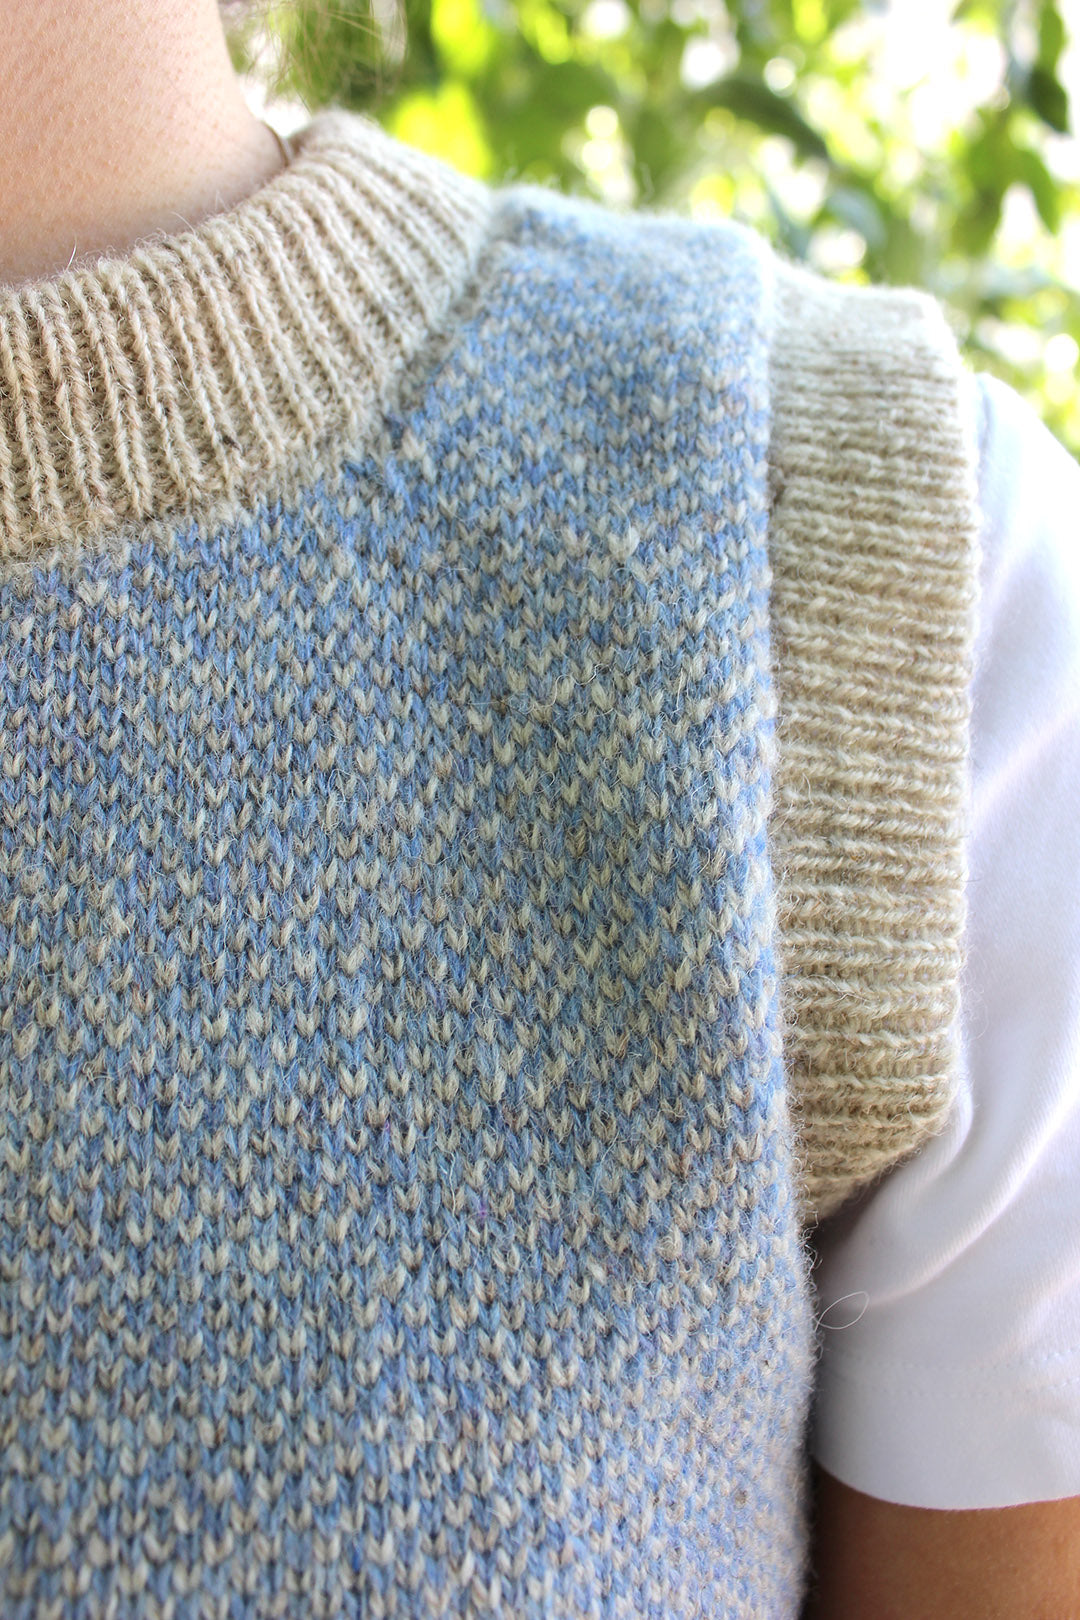 Shetland knitted tank top in pale blue and natural pale grey wool with round neck. Shown close up.